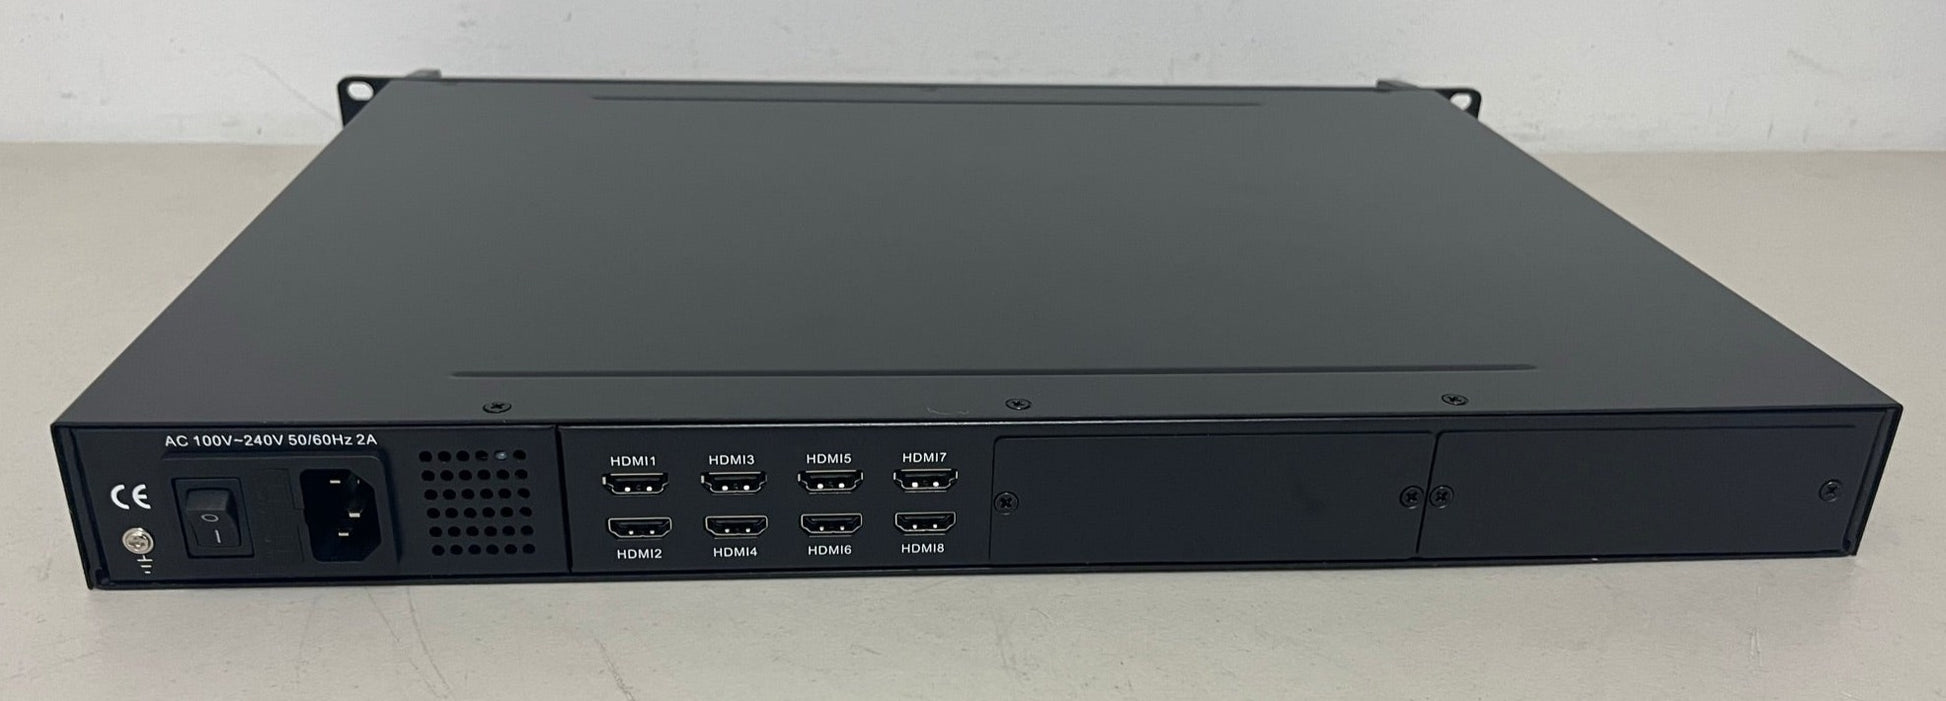 New THOR H-HDPerformux-8 for Sale. We Sell Professional Audio Equipment. Audio Systems, Amplifiers, Consoles, Mixers, Electronics, Entertainment, Sound, Live.